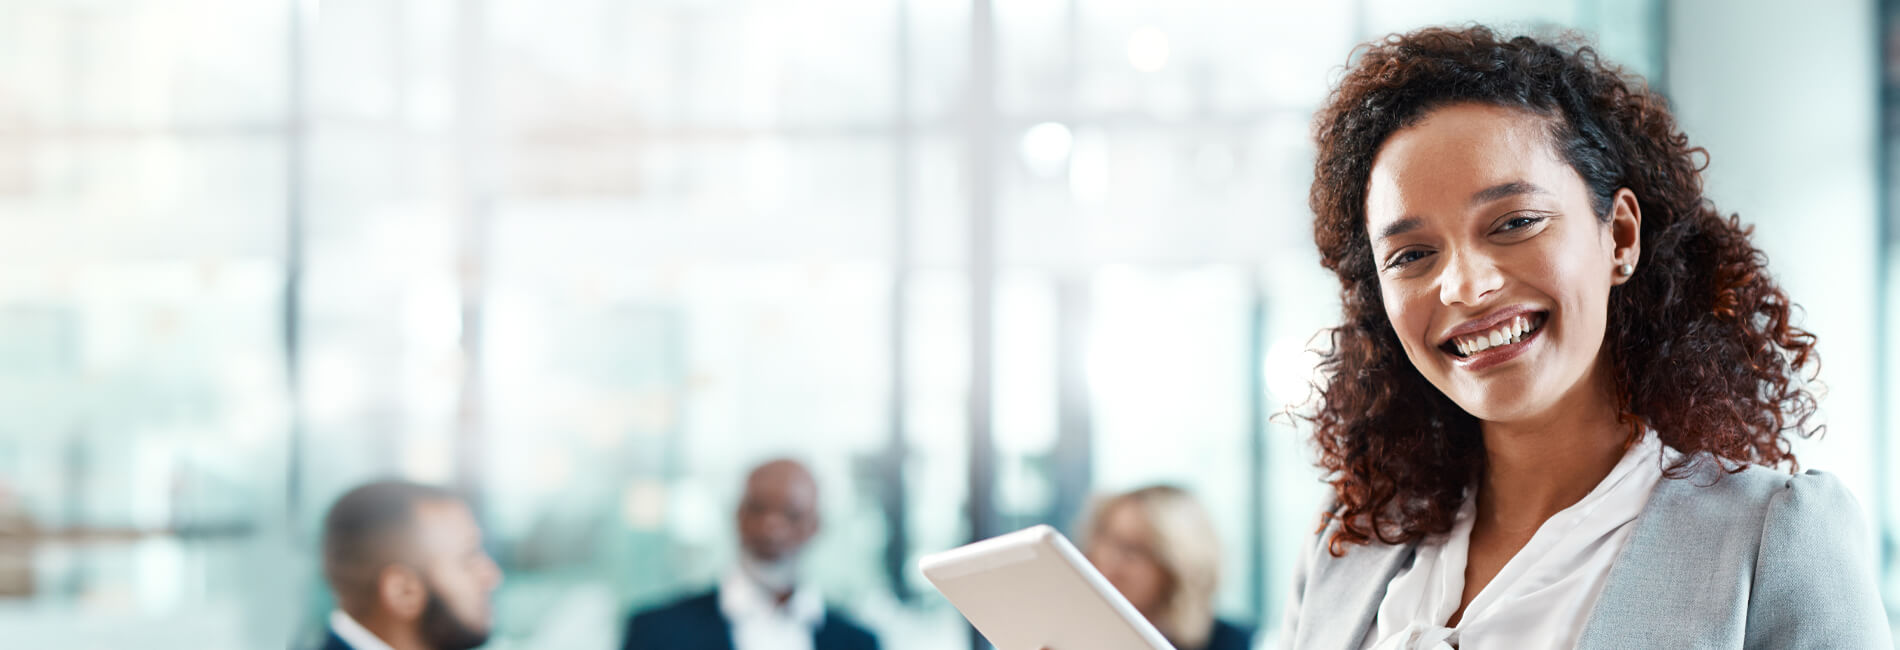 Female business executive standing and smiling with a tablet device with professionals seated in the background